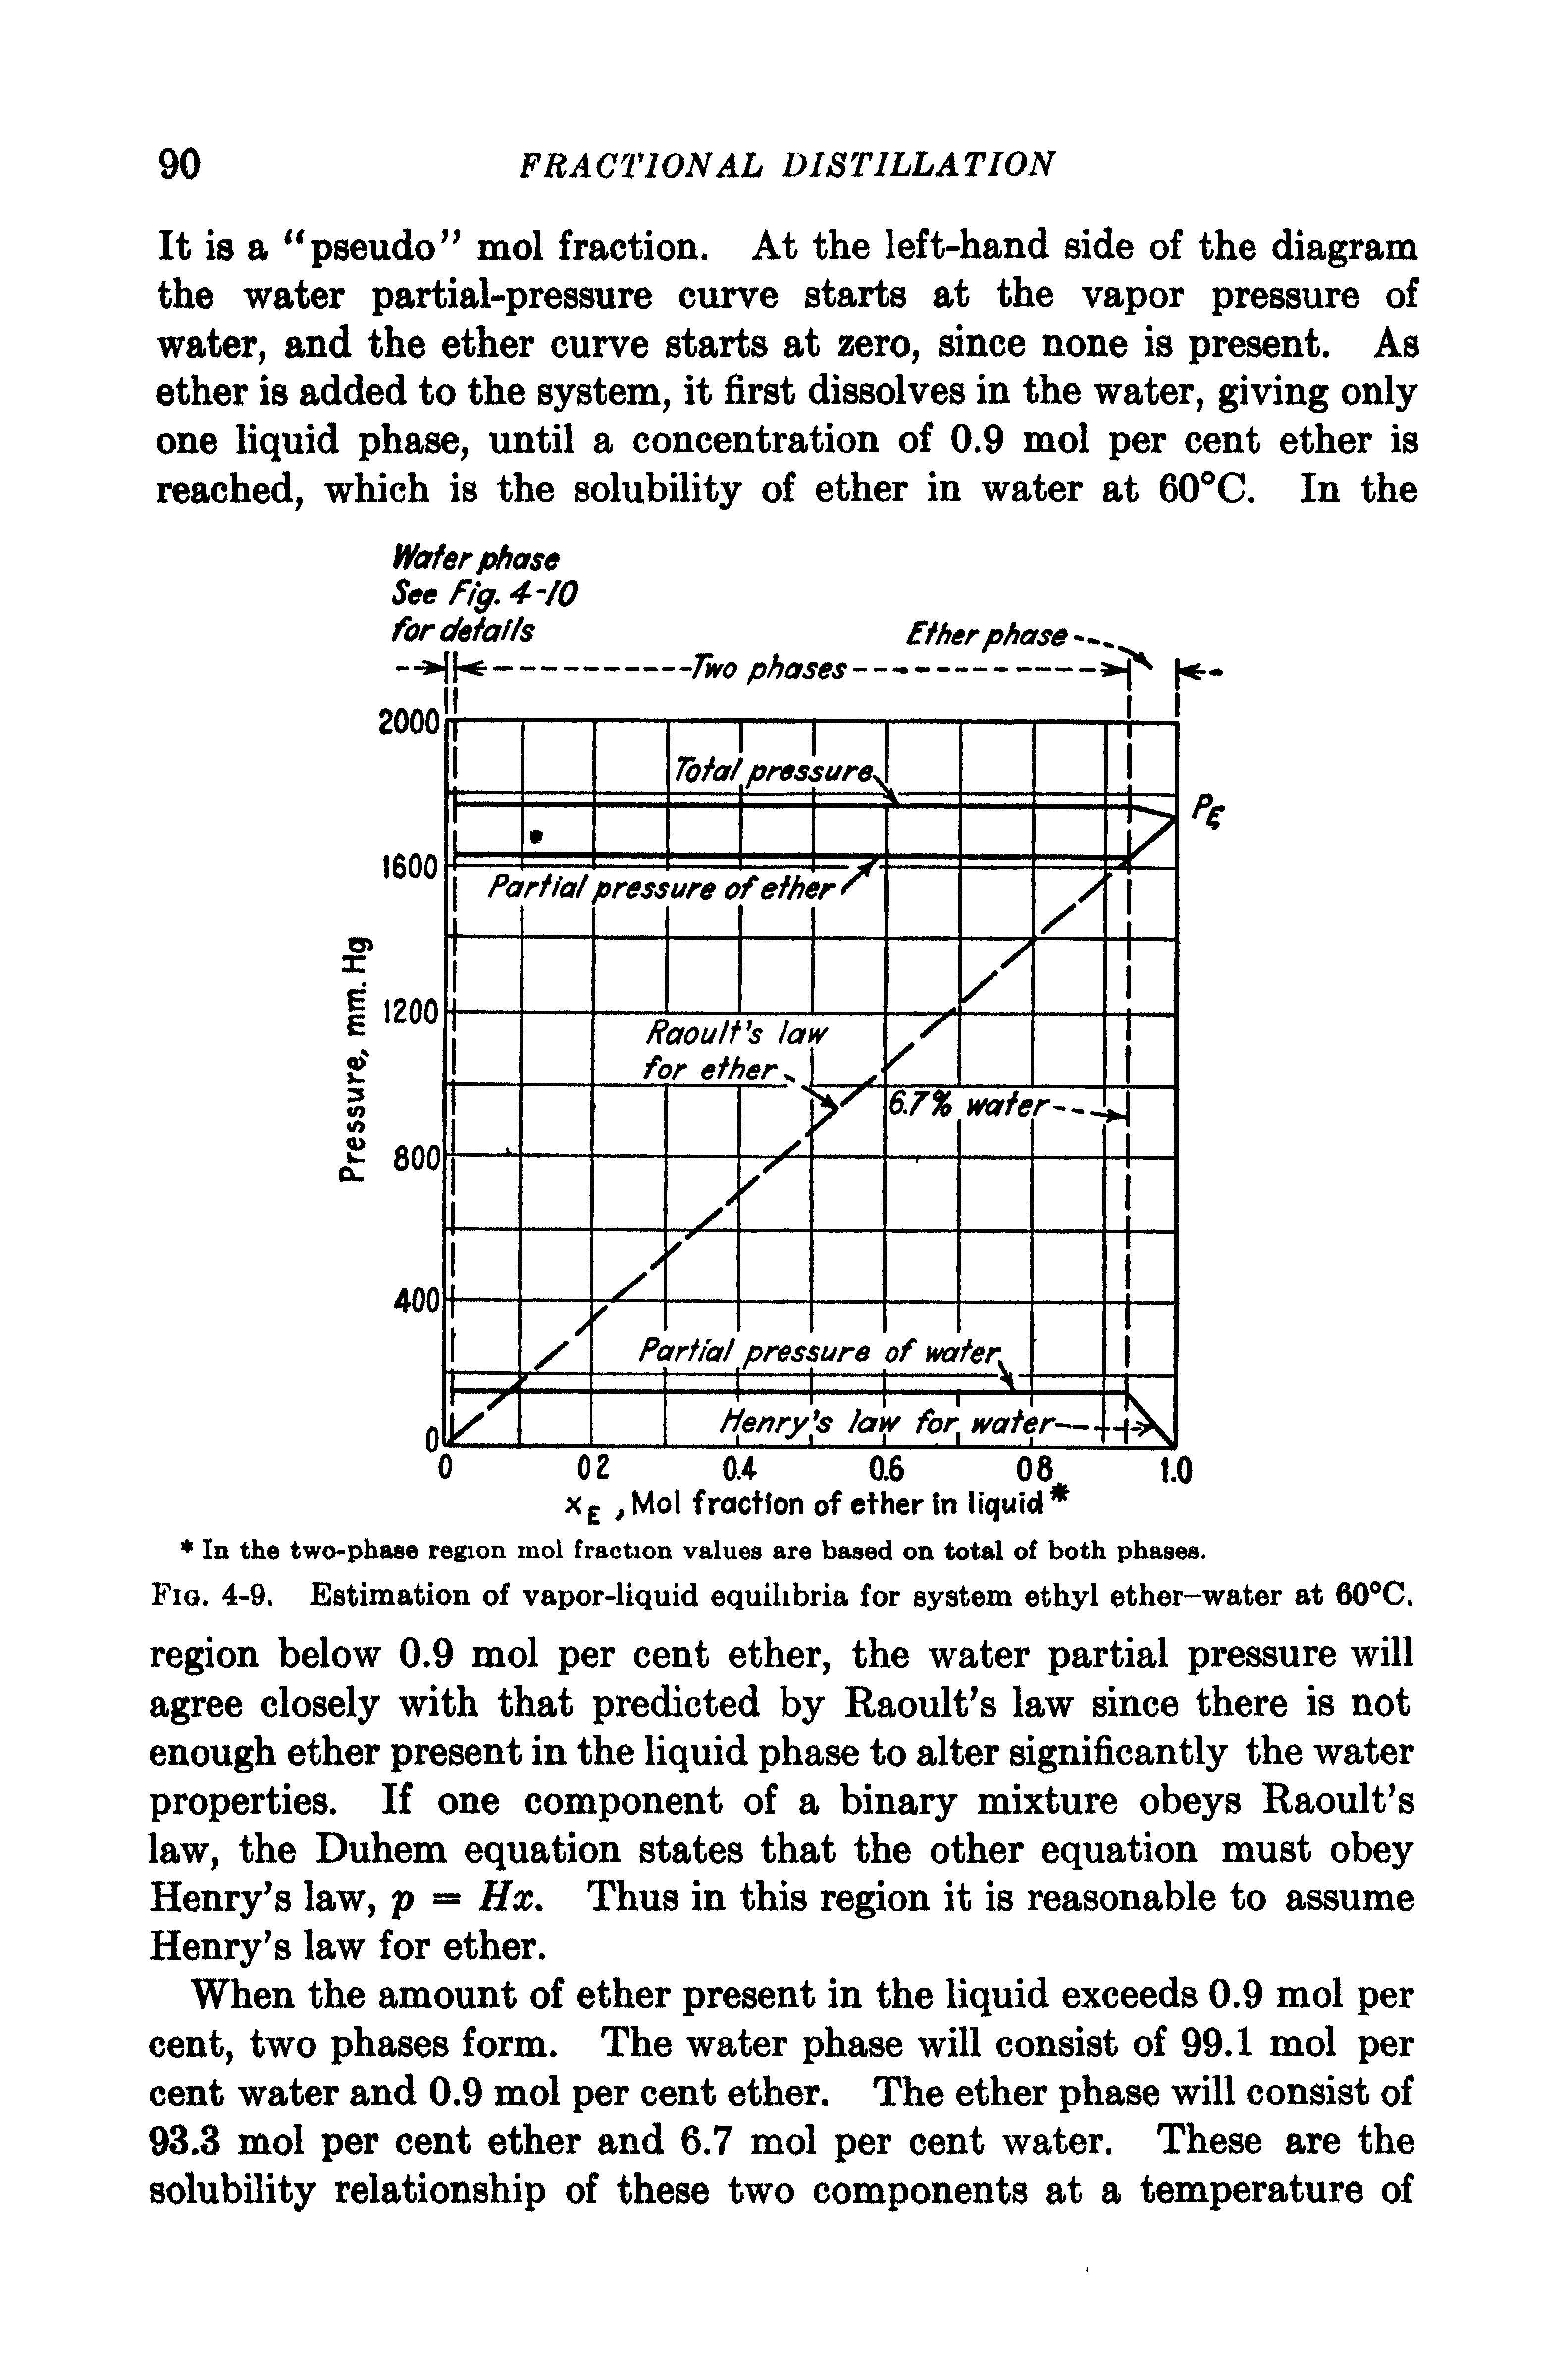 Fig. 4-9. Estimation of vapor-liquid equilibria for system ethyl ether-water at 60 C.